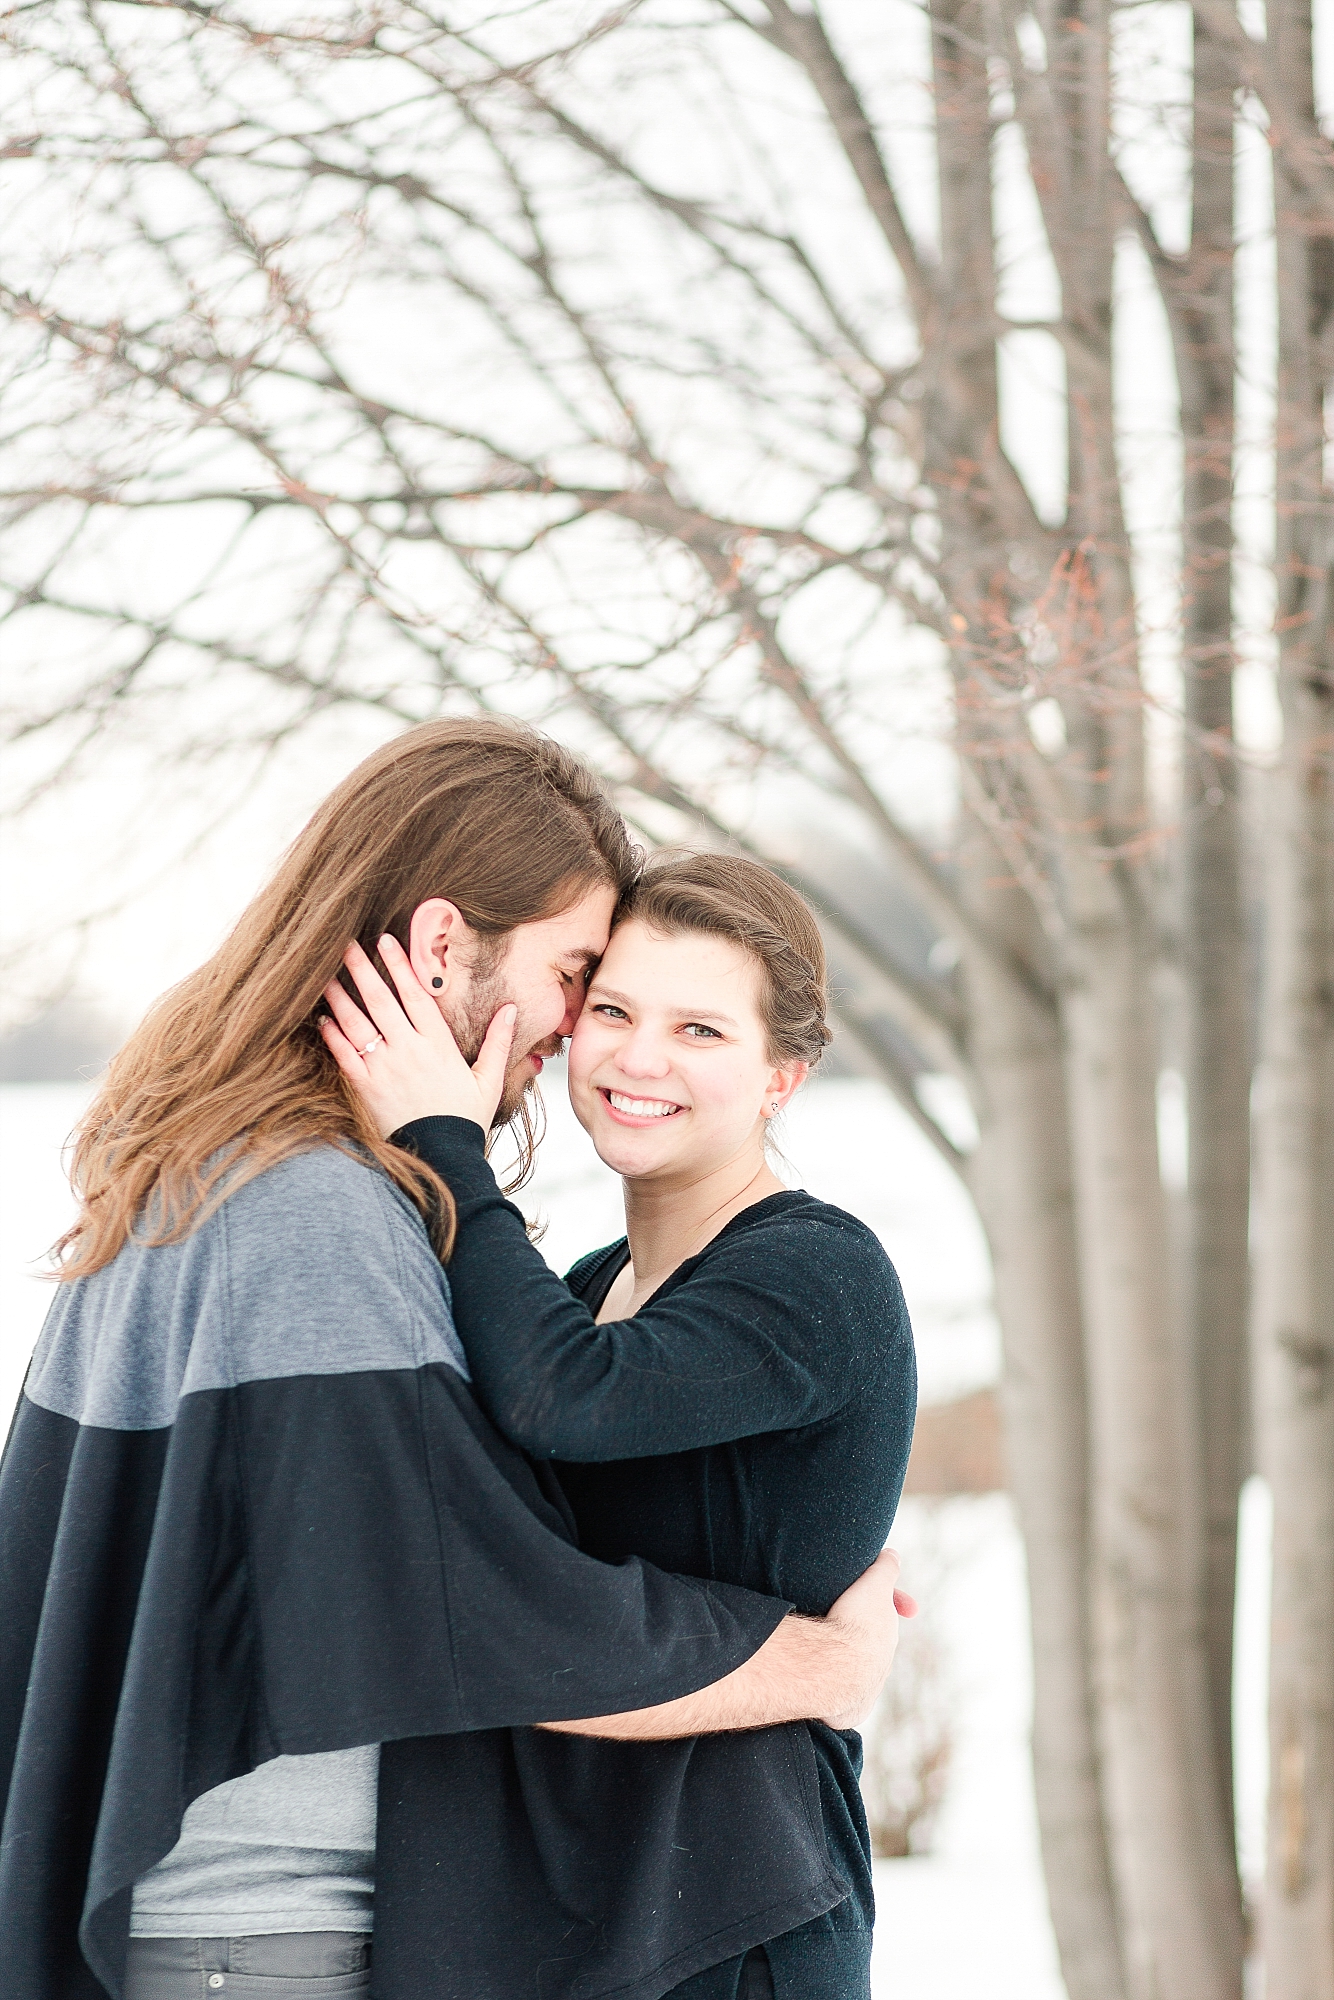 Moorhead engagement session in snowy Johnson Park